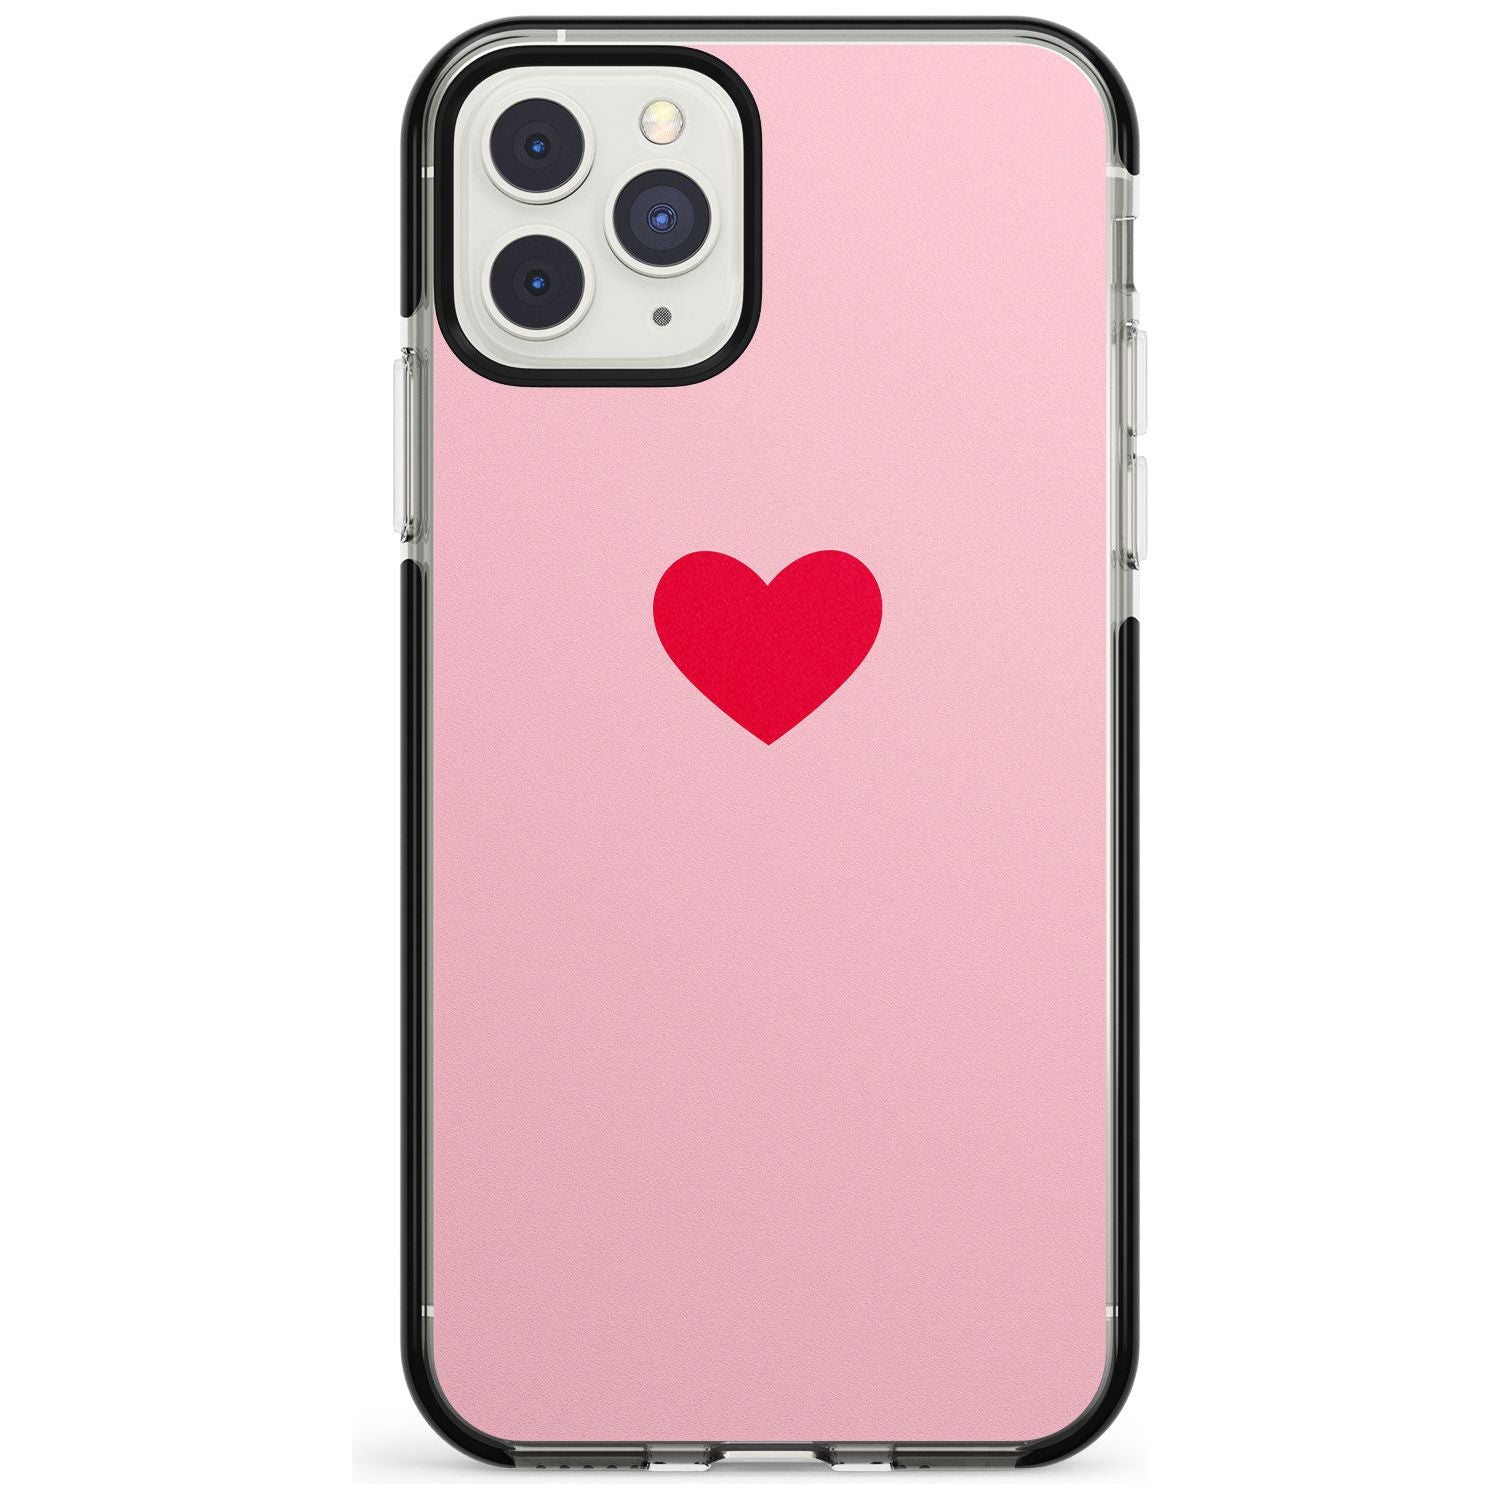 Single Heart Red & Pink Black Impact Phone Case for iPhone 11 Pro Max